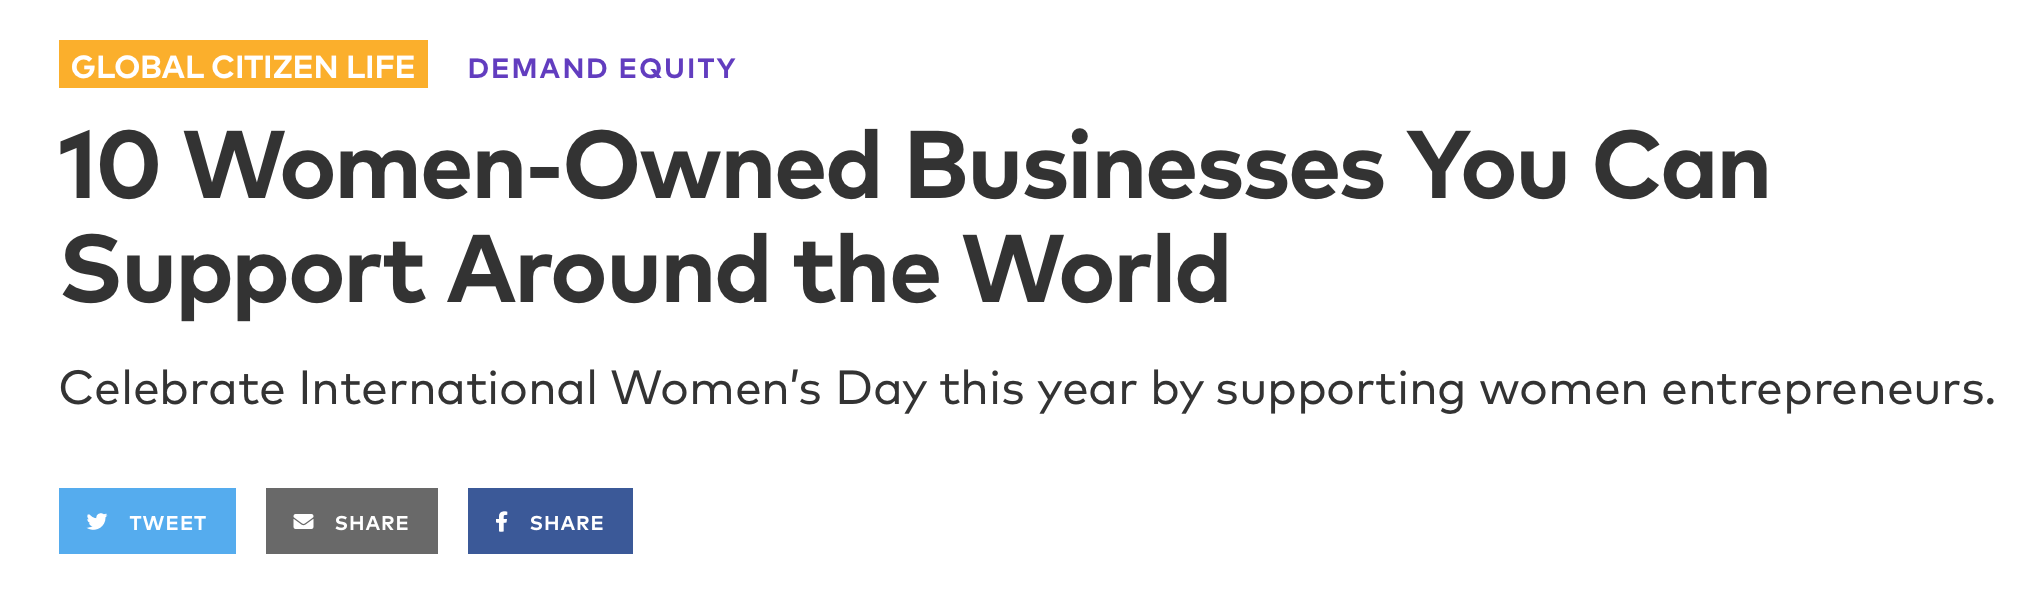 Happy Women’s Day advertisement ideas - Support women owned businesses